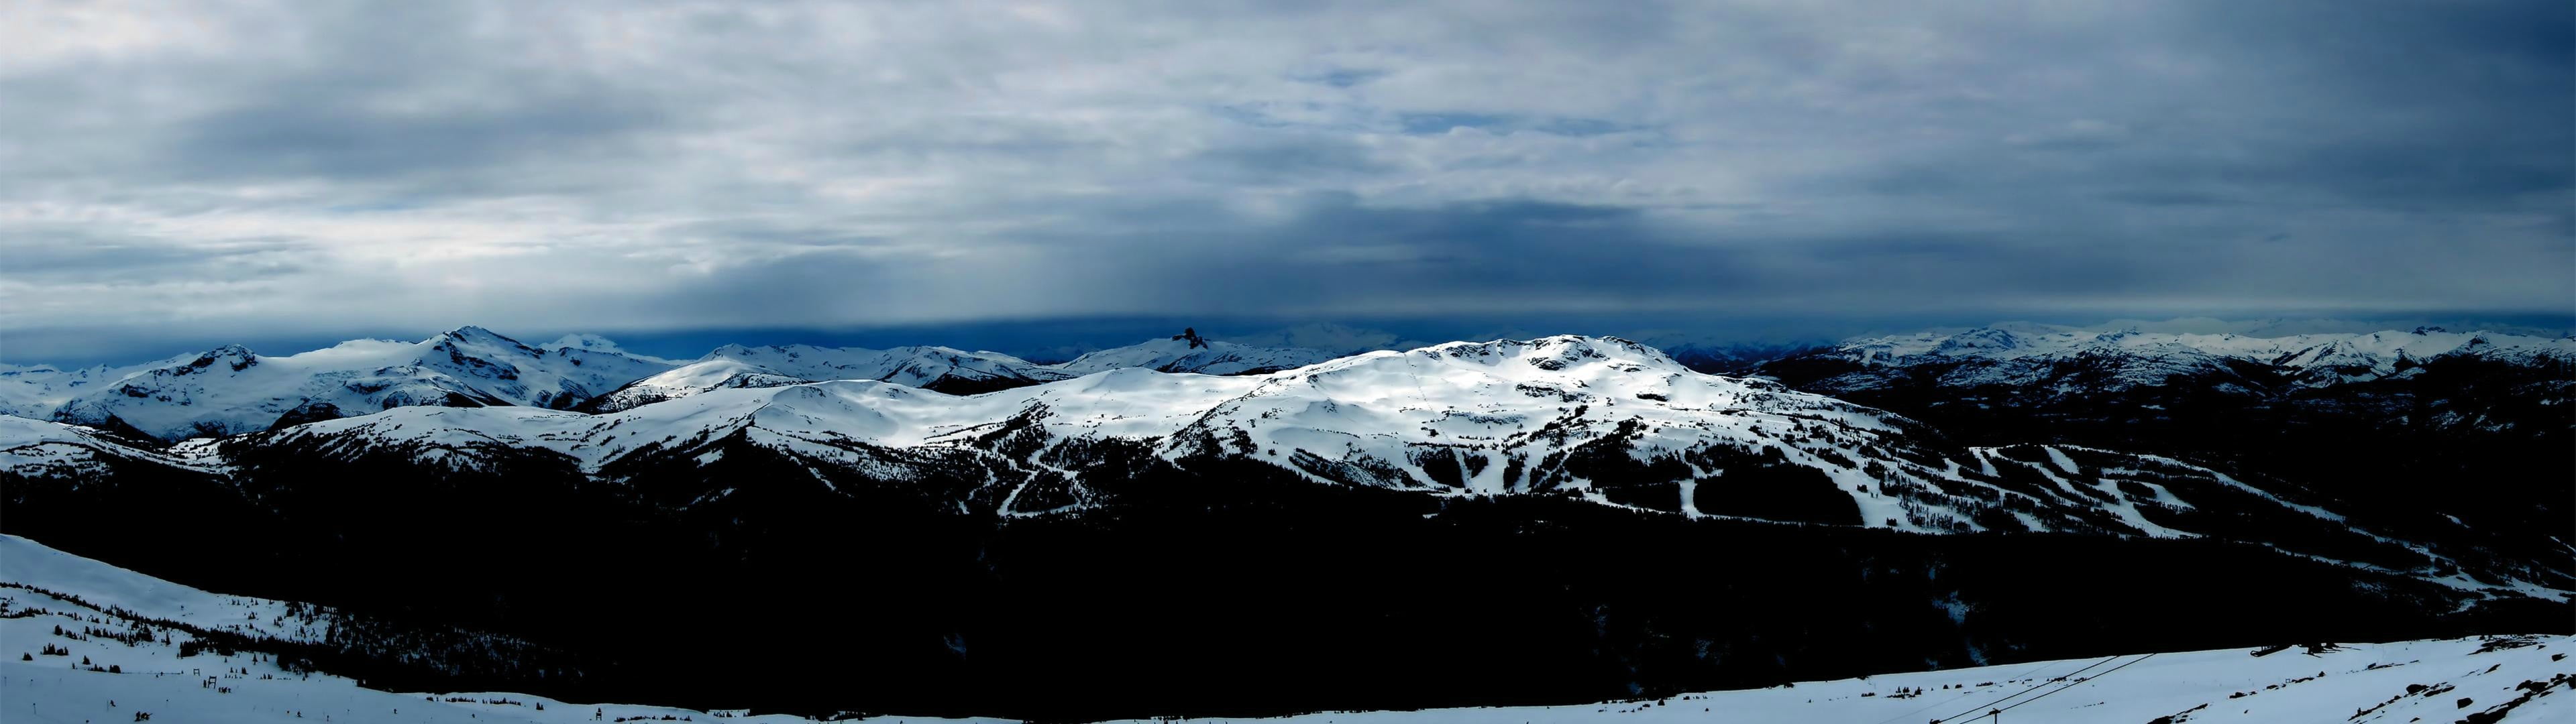 panoramic photography of mountain, multiple display, cold, desolate, snow